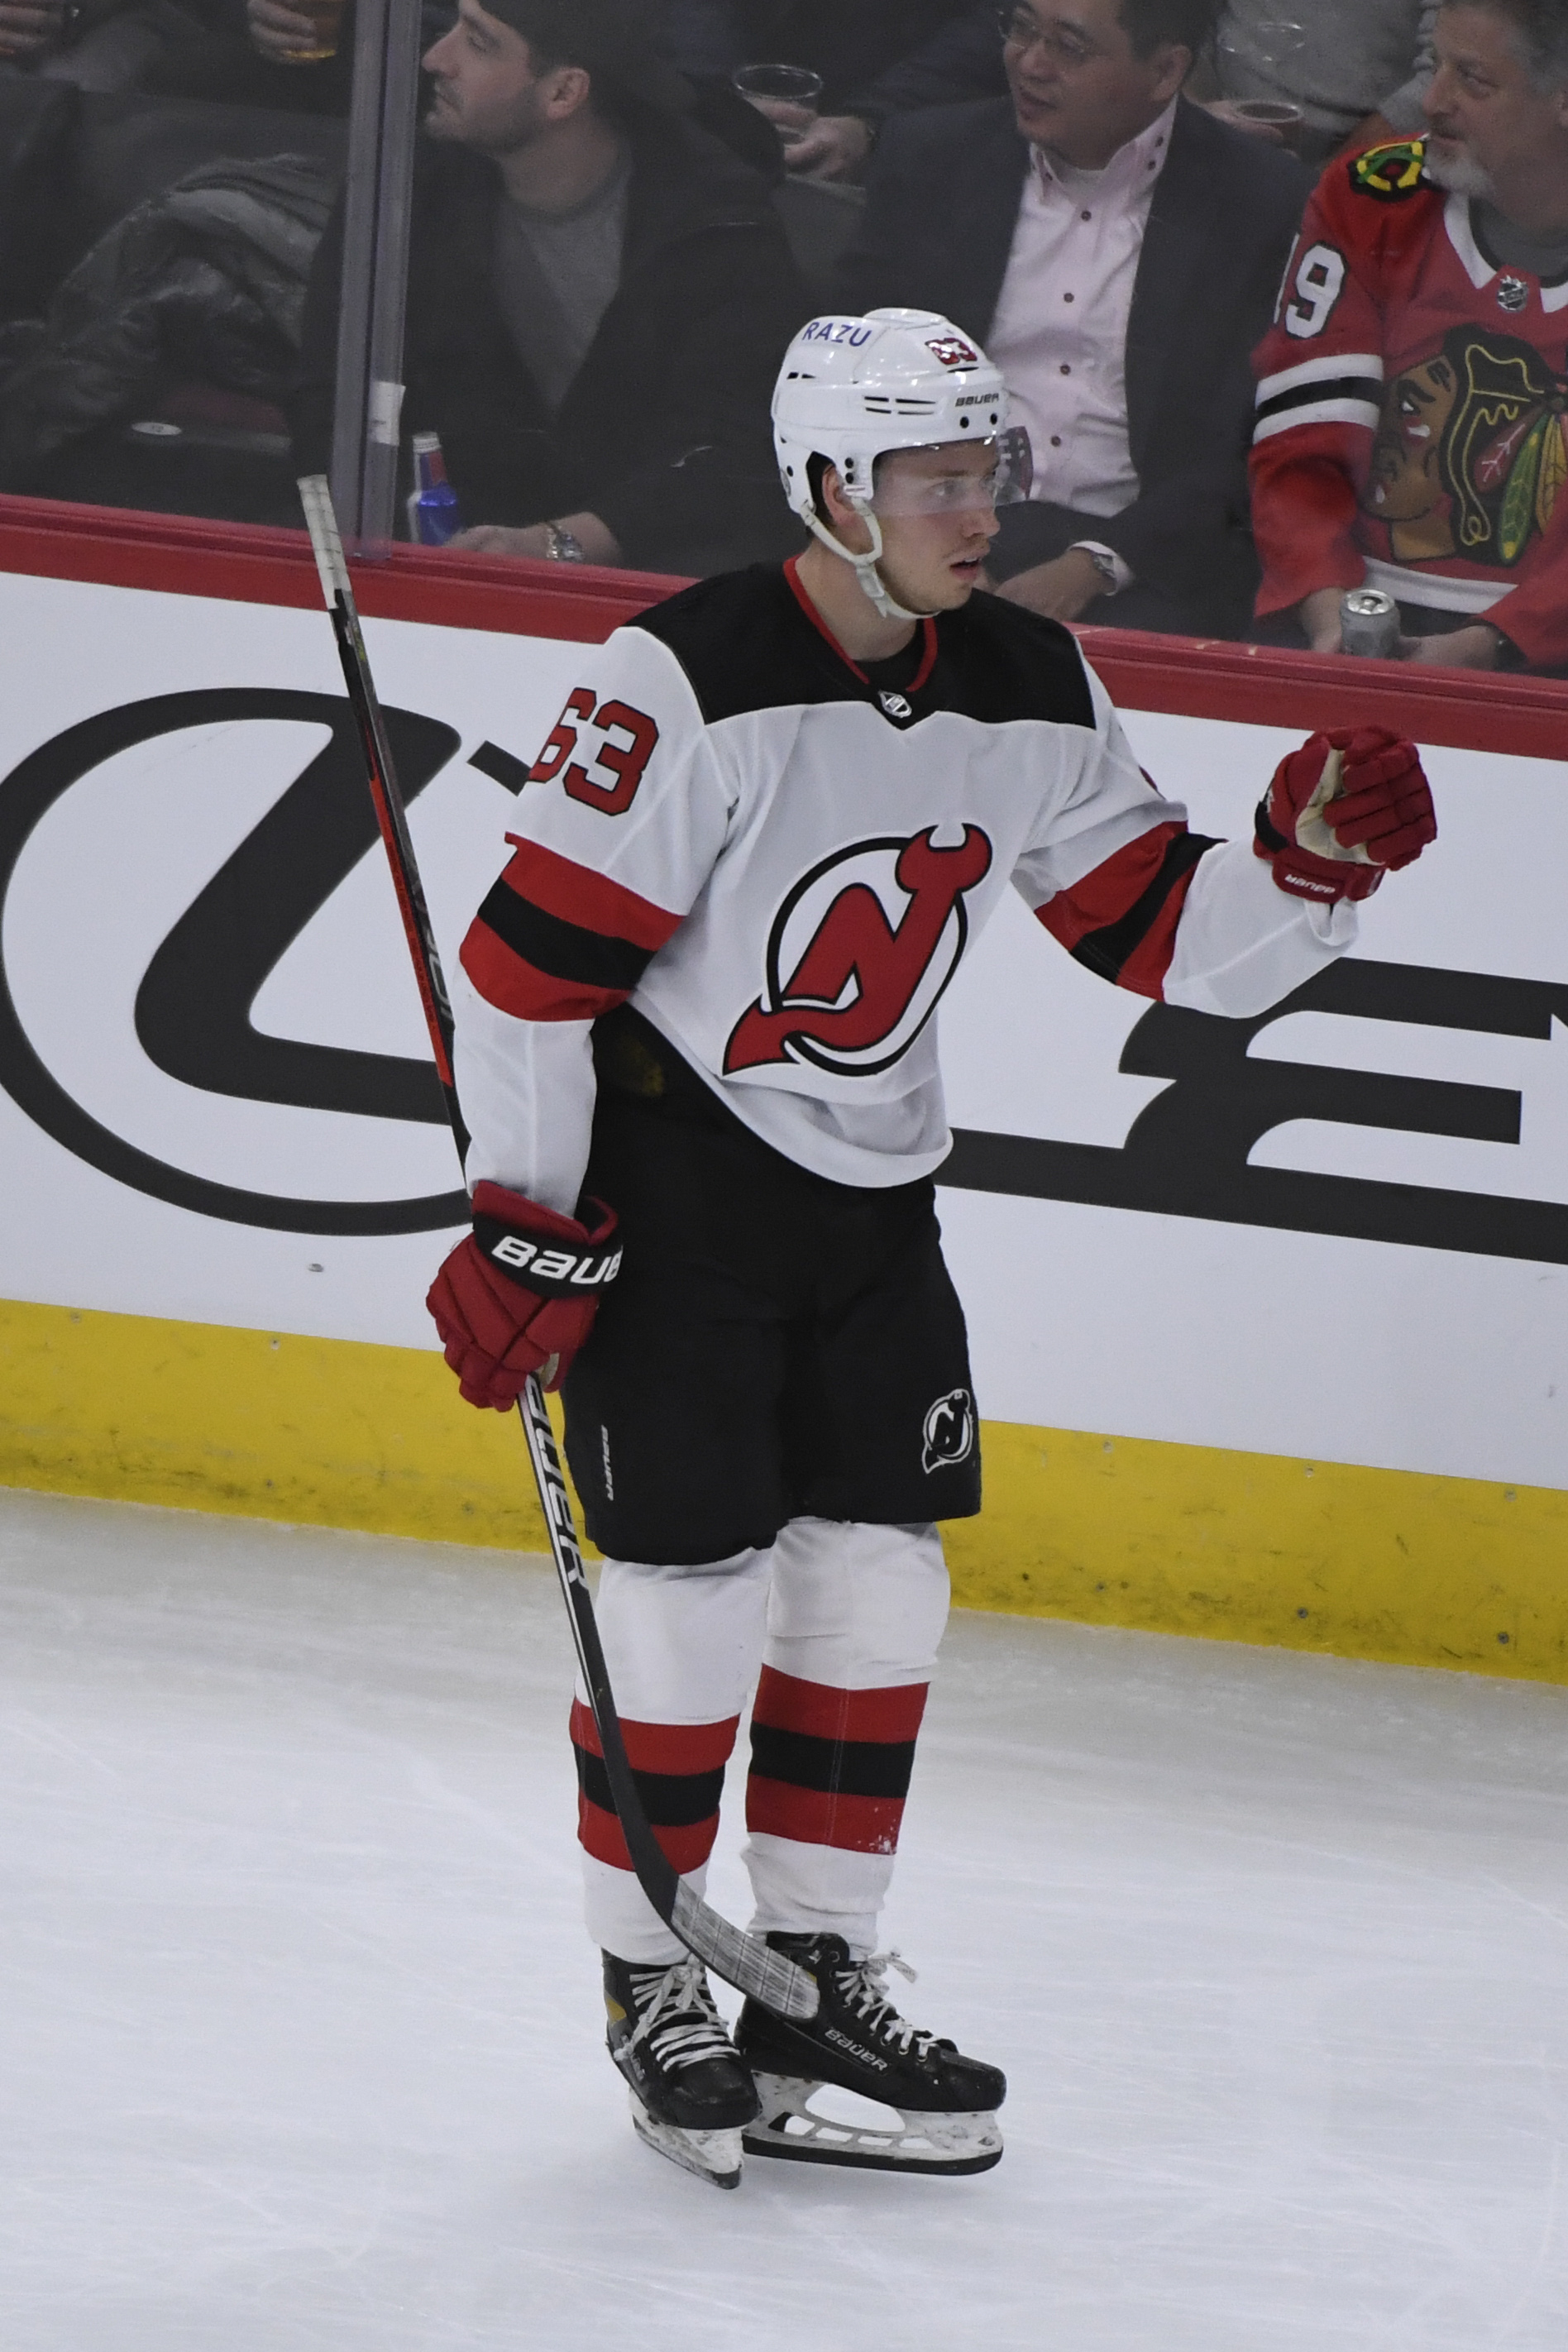 New Jersey Devils: Can Pavel Zacha Be An Impact Player?